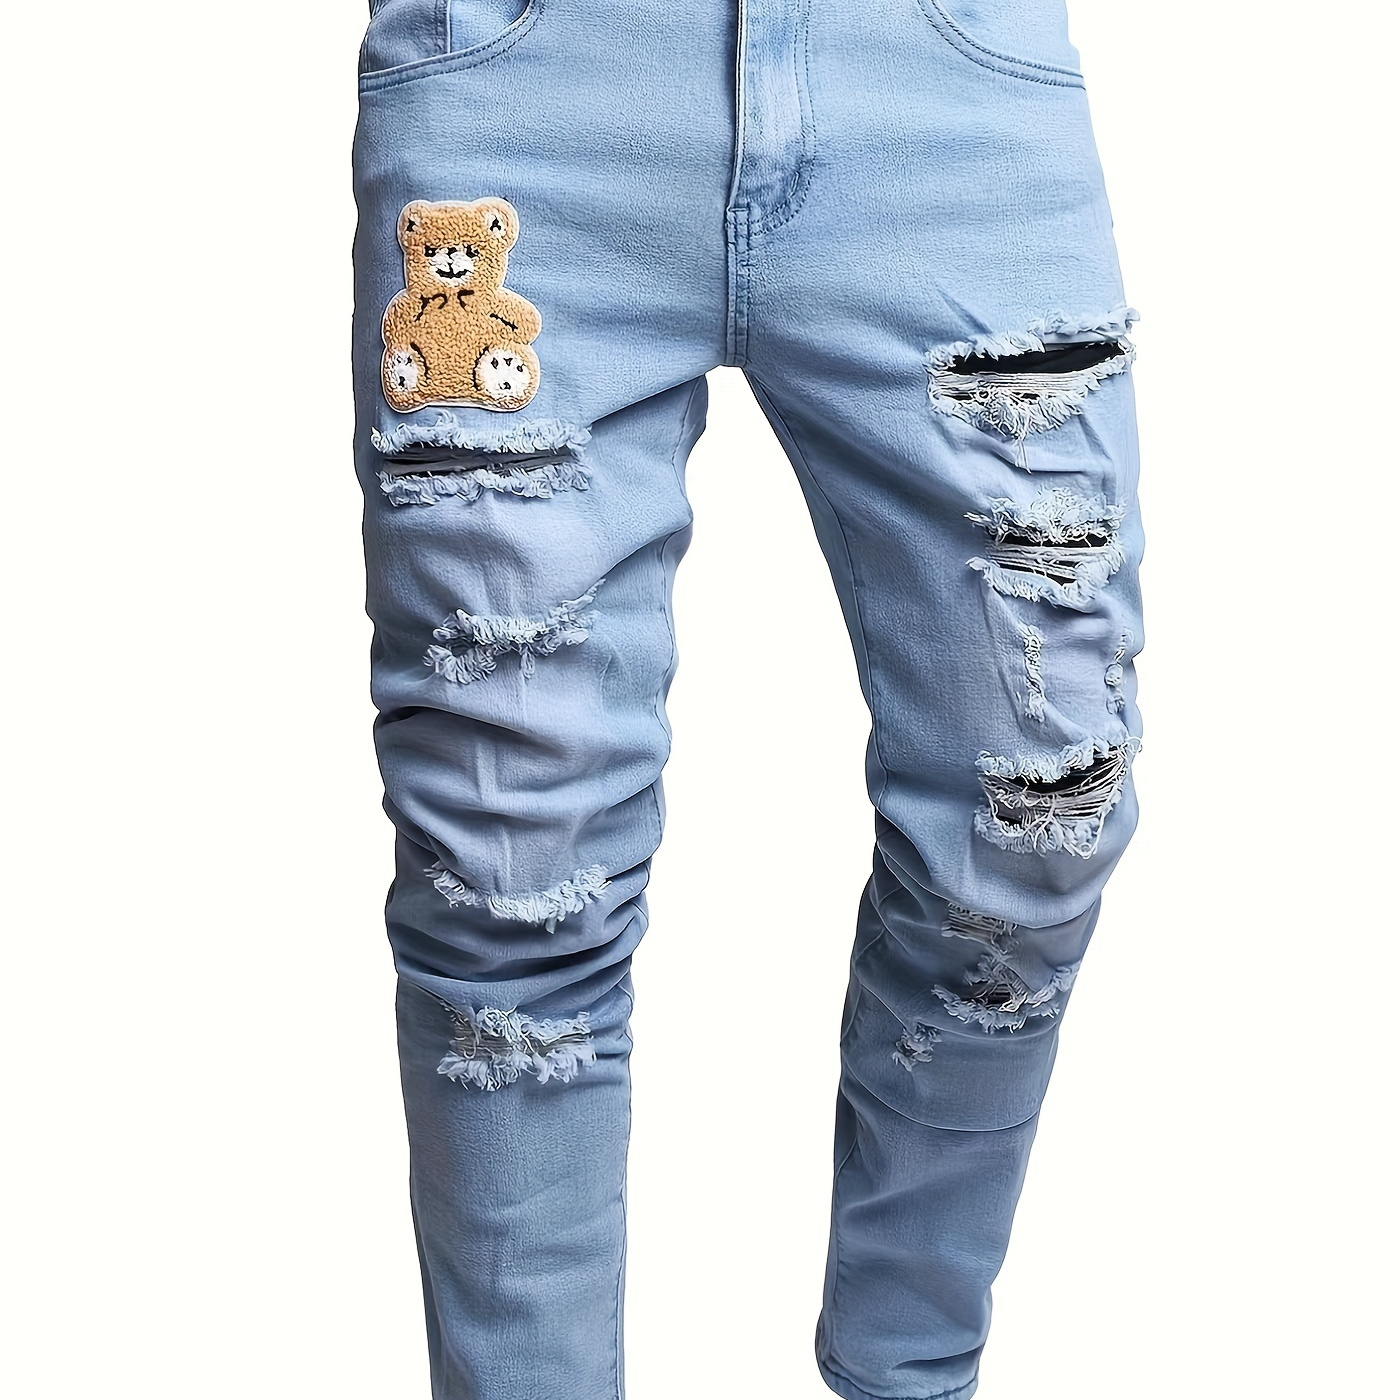 

Slim Fit Toy Bear Pattern Ripped Jeans, Men's Casual Mid Stretch Chic Denim Pants For Spring Summer